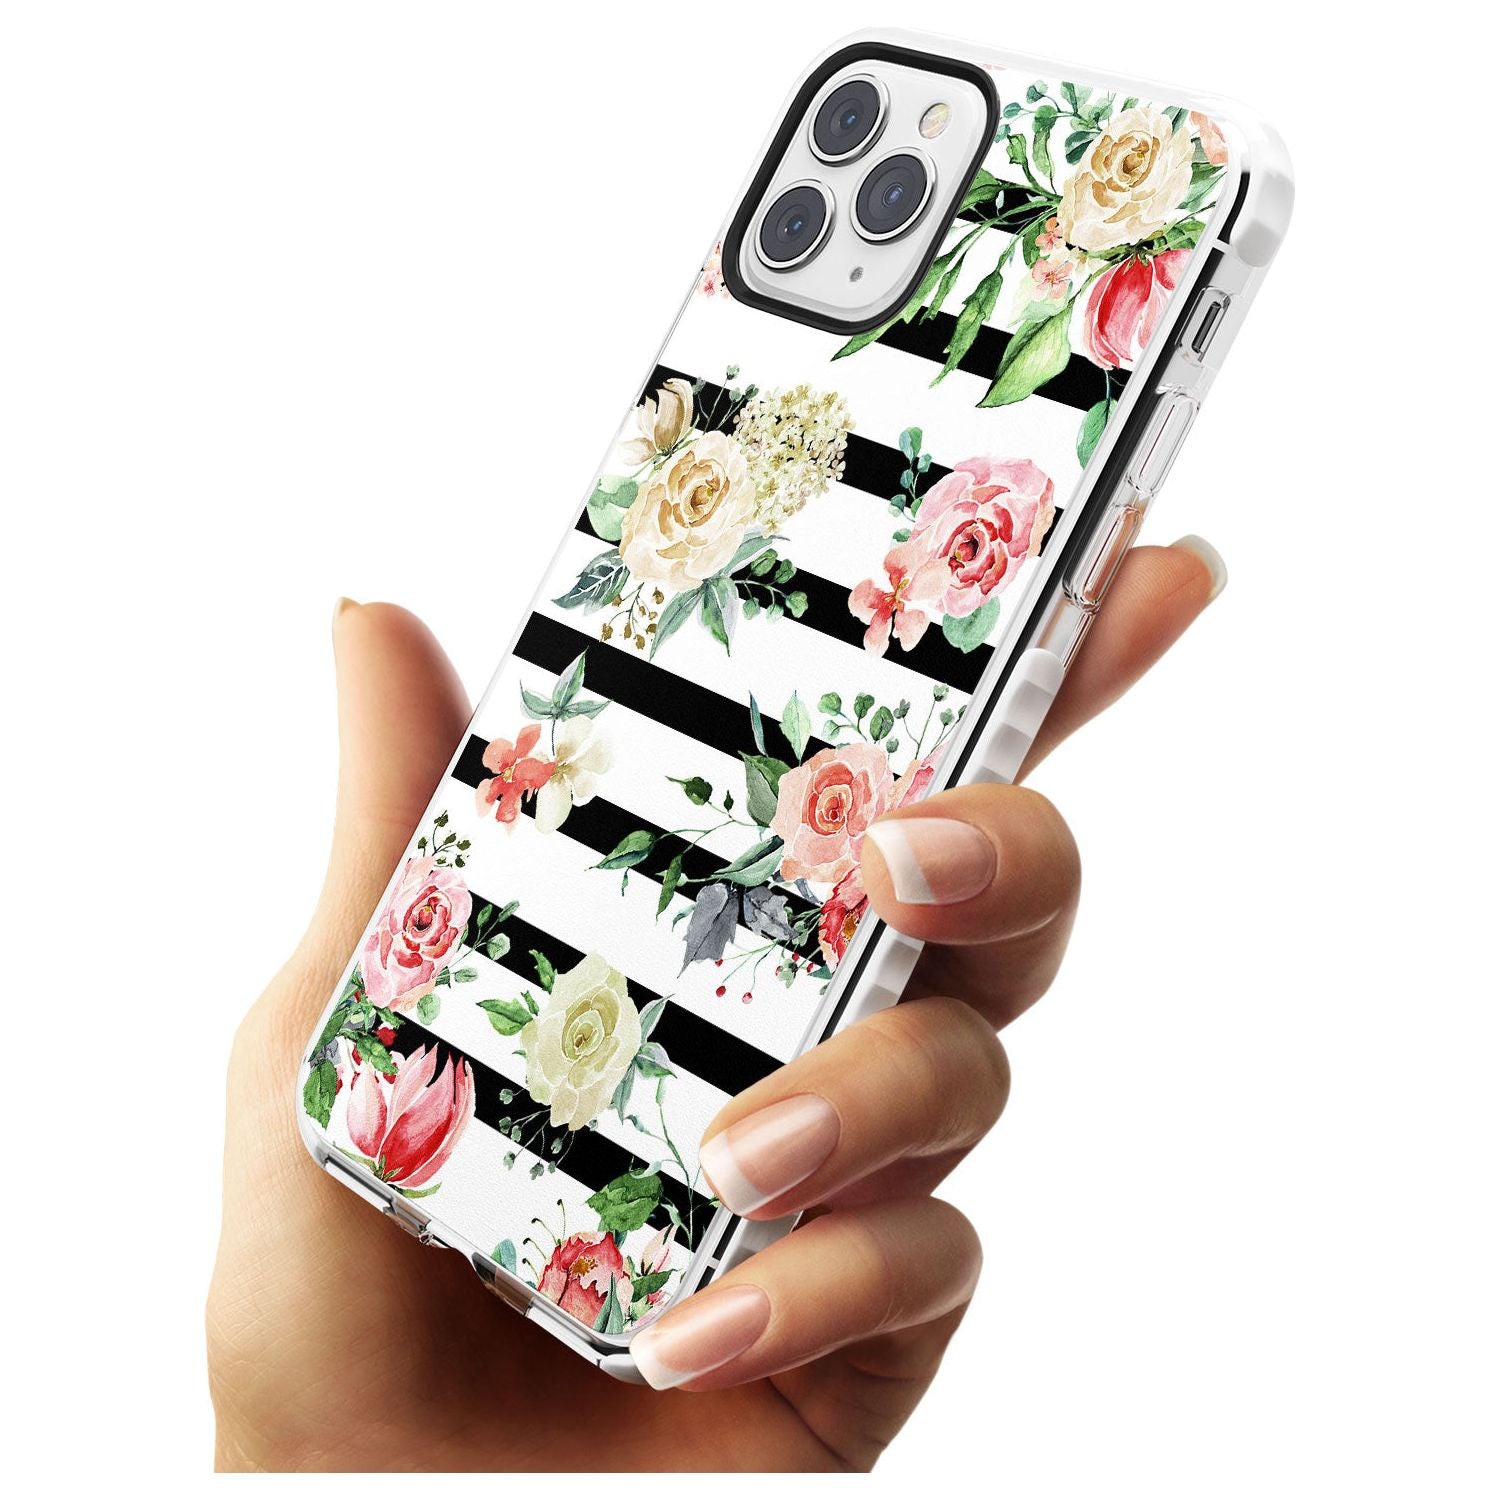 Bold Stripes & Flower Pattern Impact Phone Case for iPhone 11 Pro Max